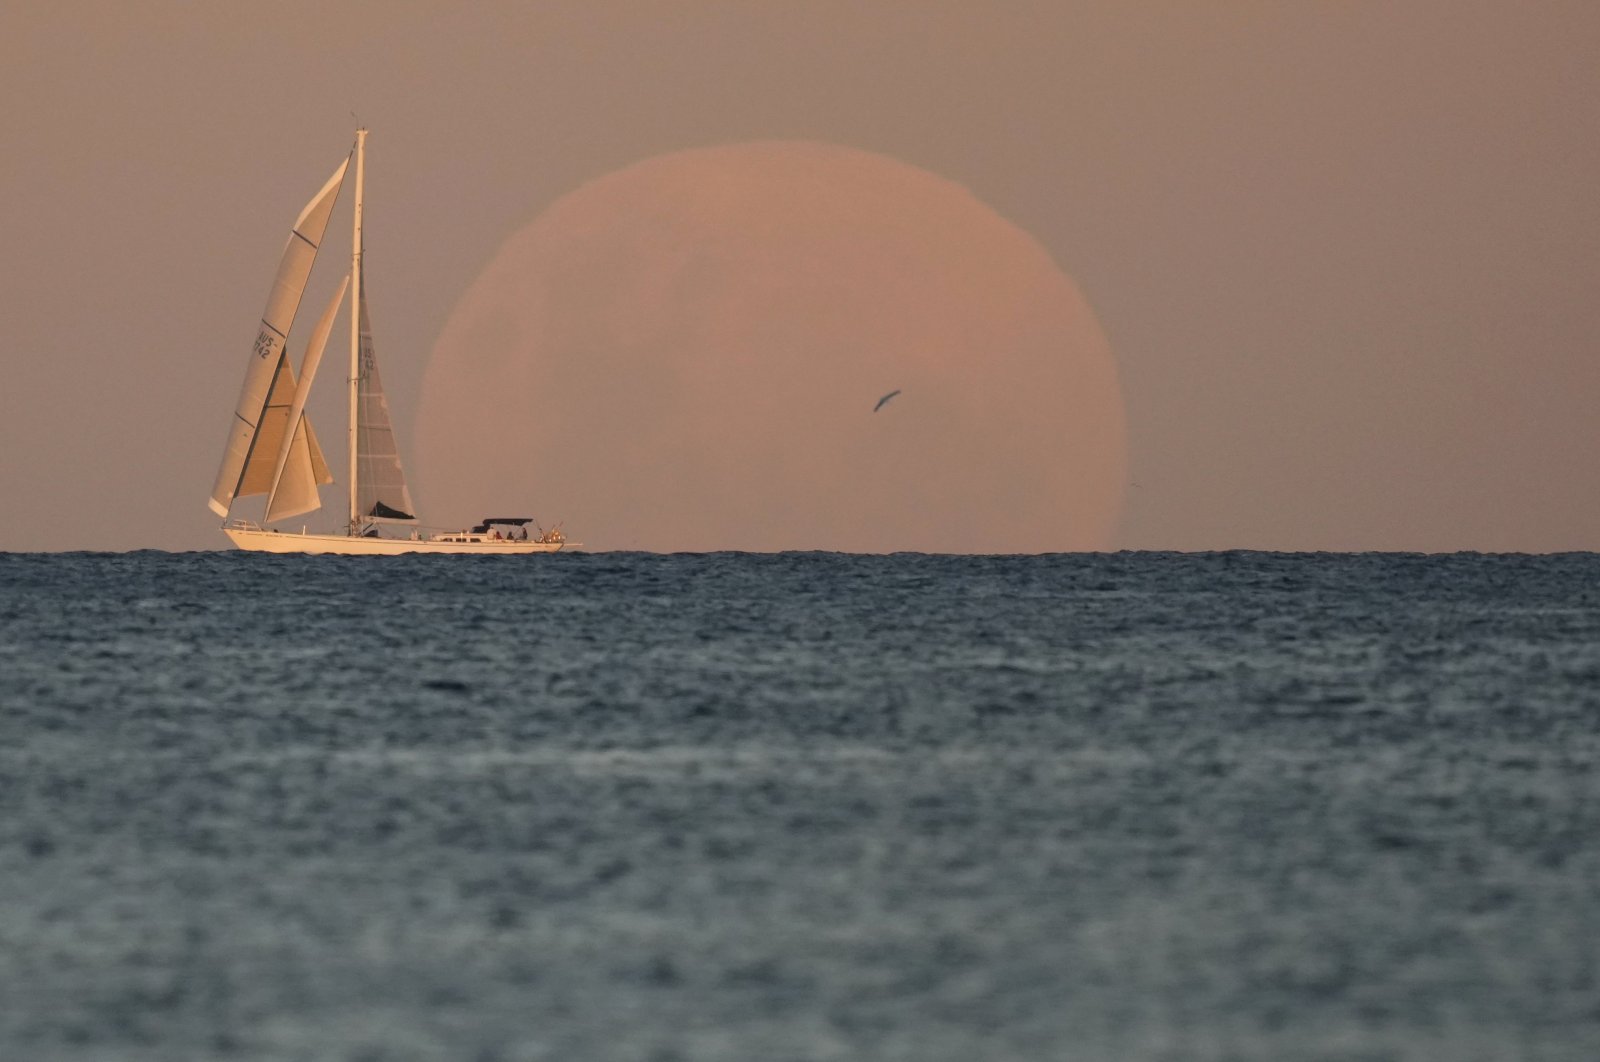 A yacht sails past as the moon rises in Sydney, Australia, May 26, 2021.  (AP Photo)
A total lunar eclipse, also known as a Super Blood Moon, will take place later tonight during which the moon will appear slightly reddish-orange in color.